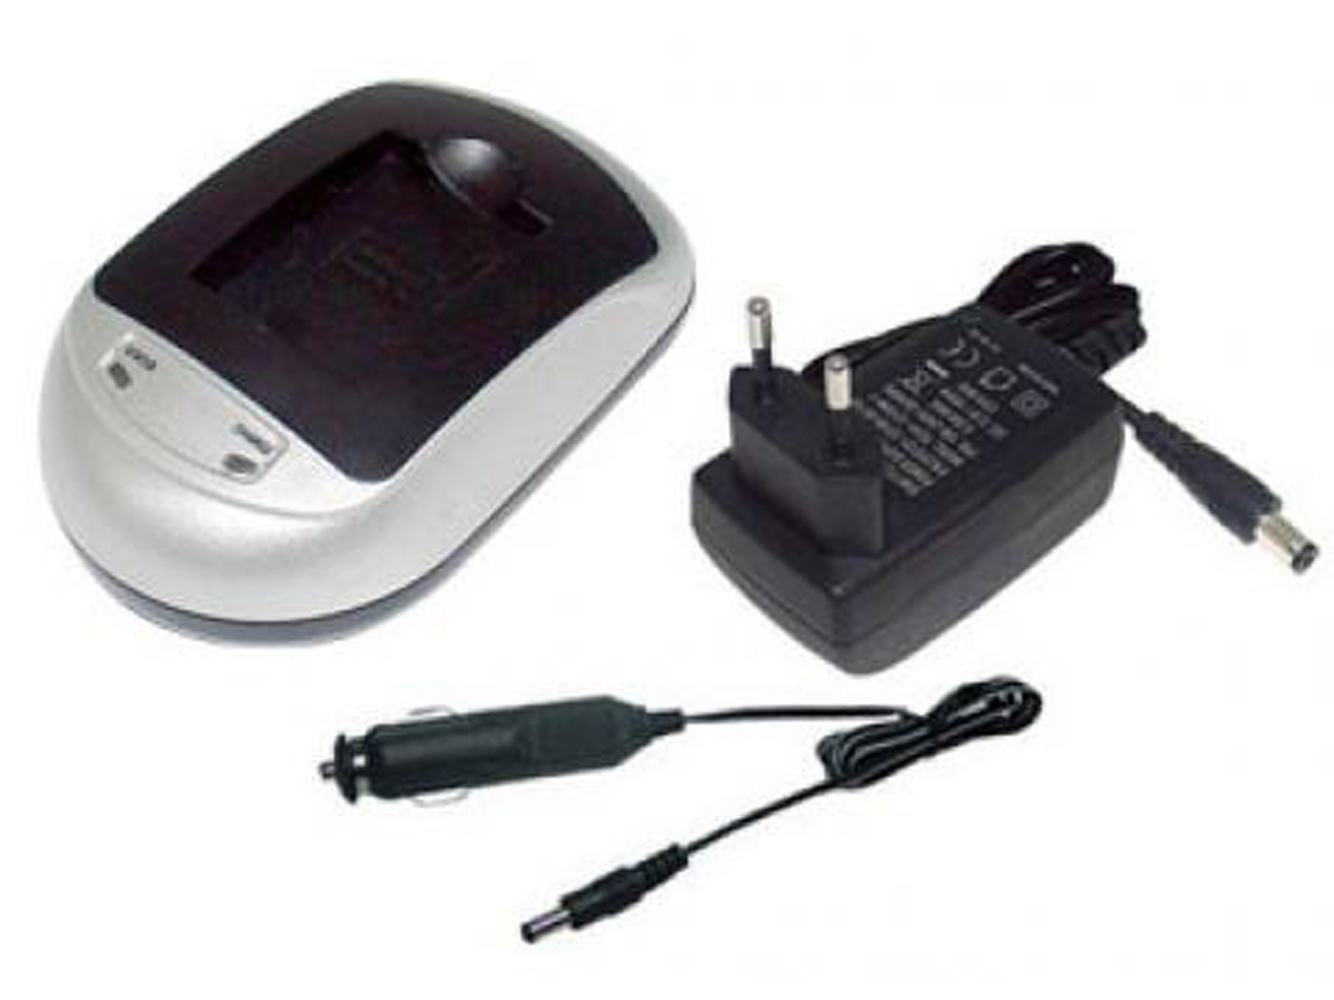 Battery Charger for PANASONIC DMW-BCG10, DMW-BCG10E, DMW-BCG10GK, DMW-BCG10PP